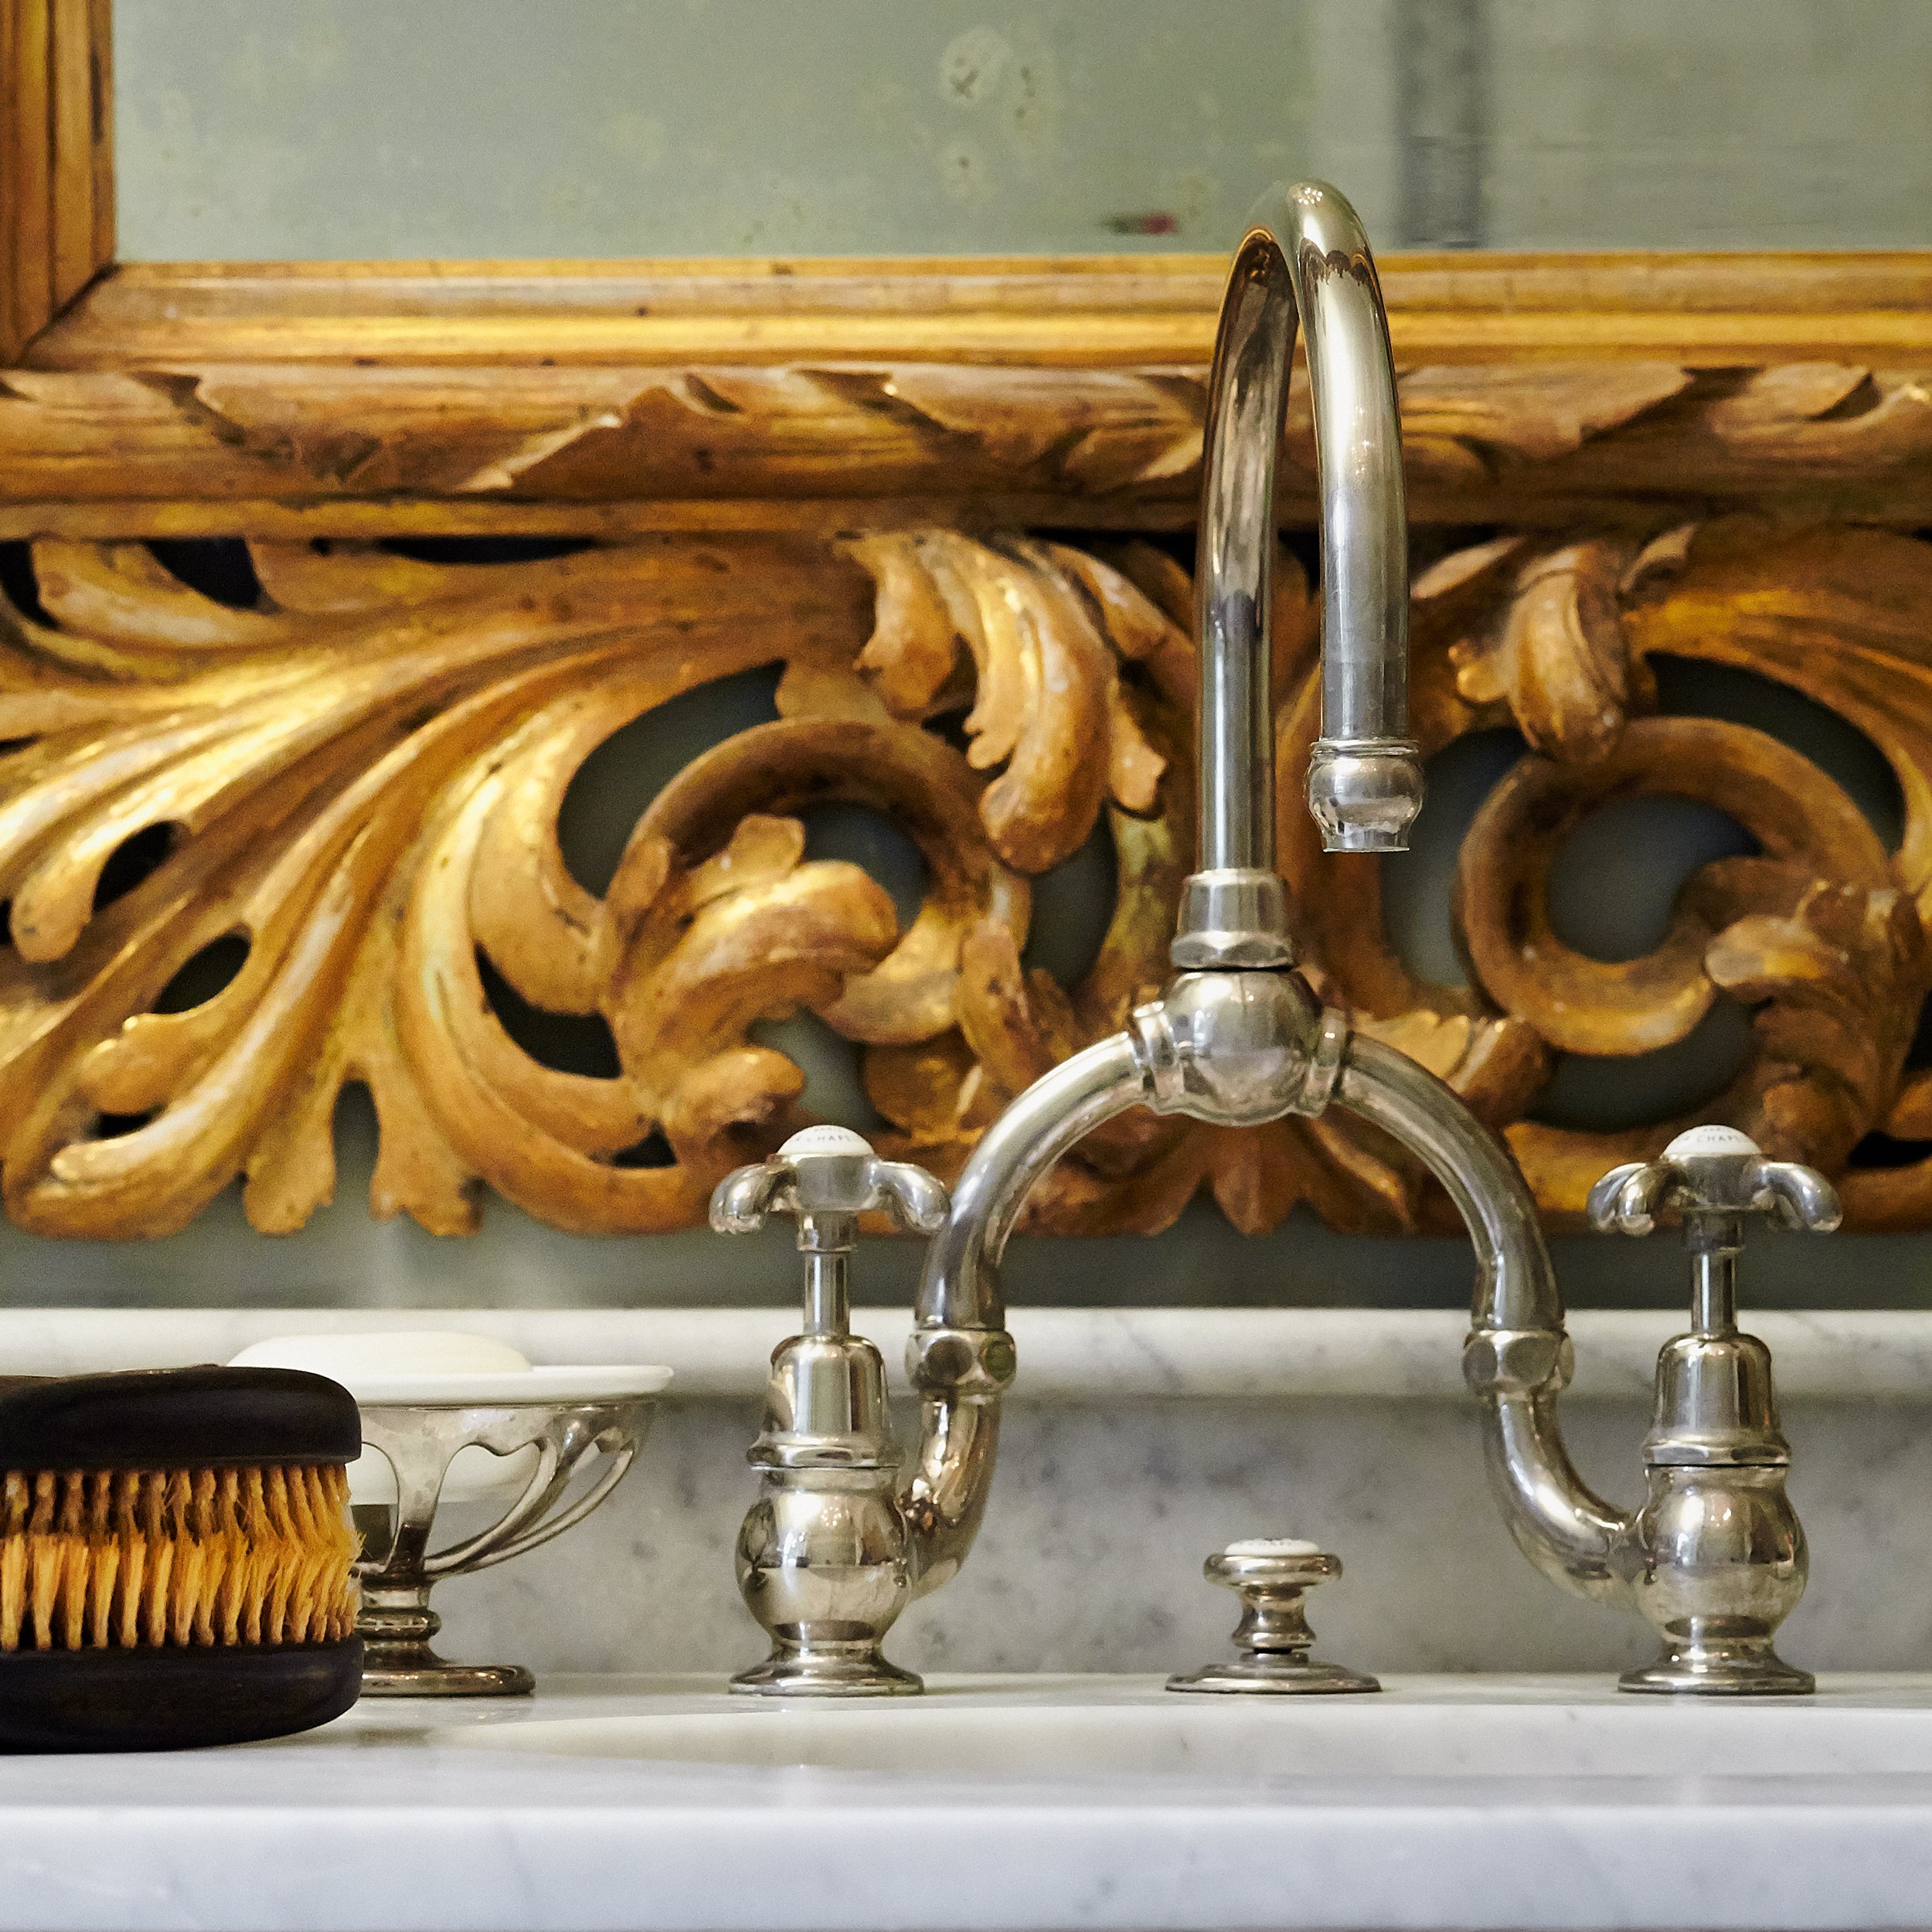 look like lefroy brooks style with amazing condition Lefroy Brooks Shires sink and pedestal 